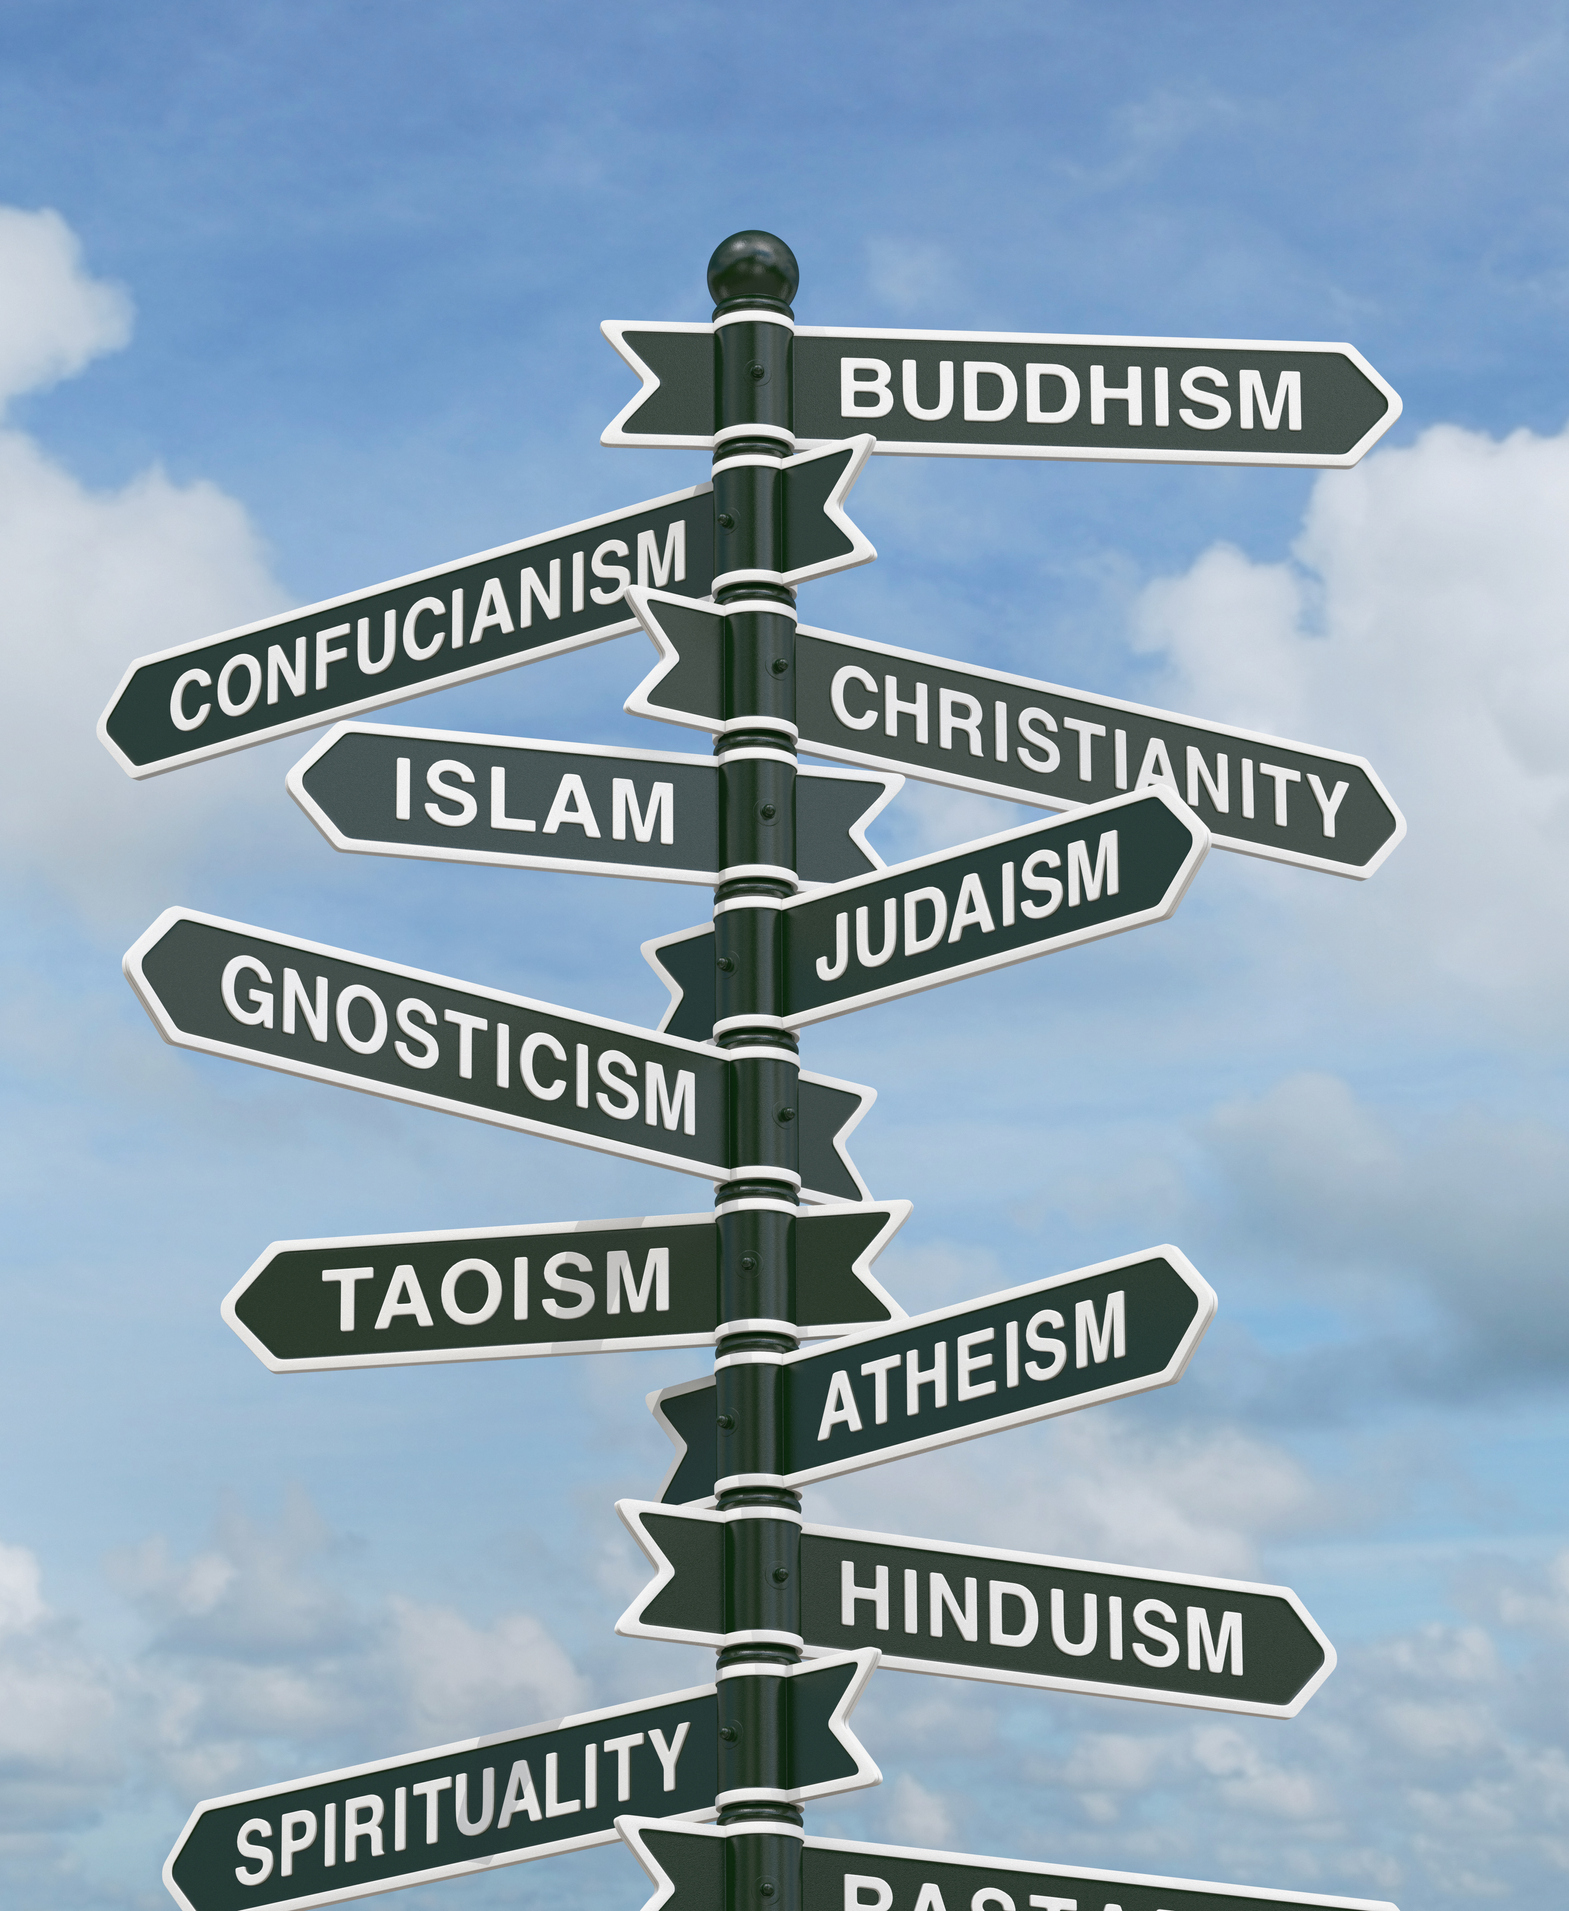 Directional signs pointing to various religions